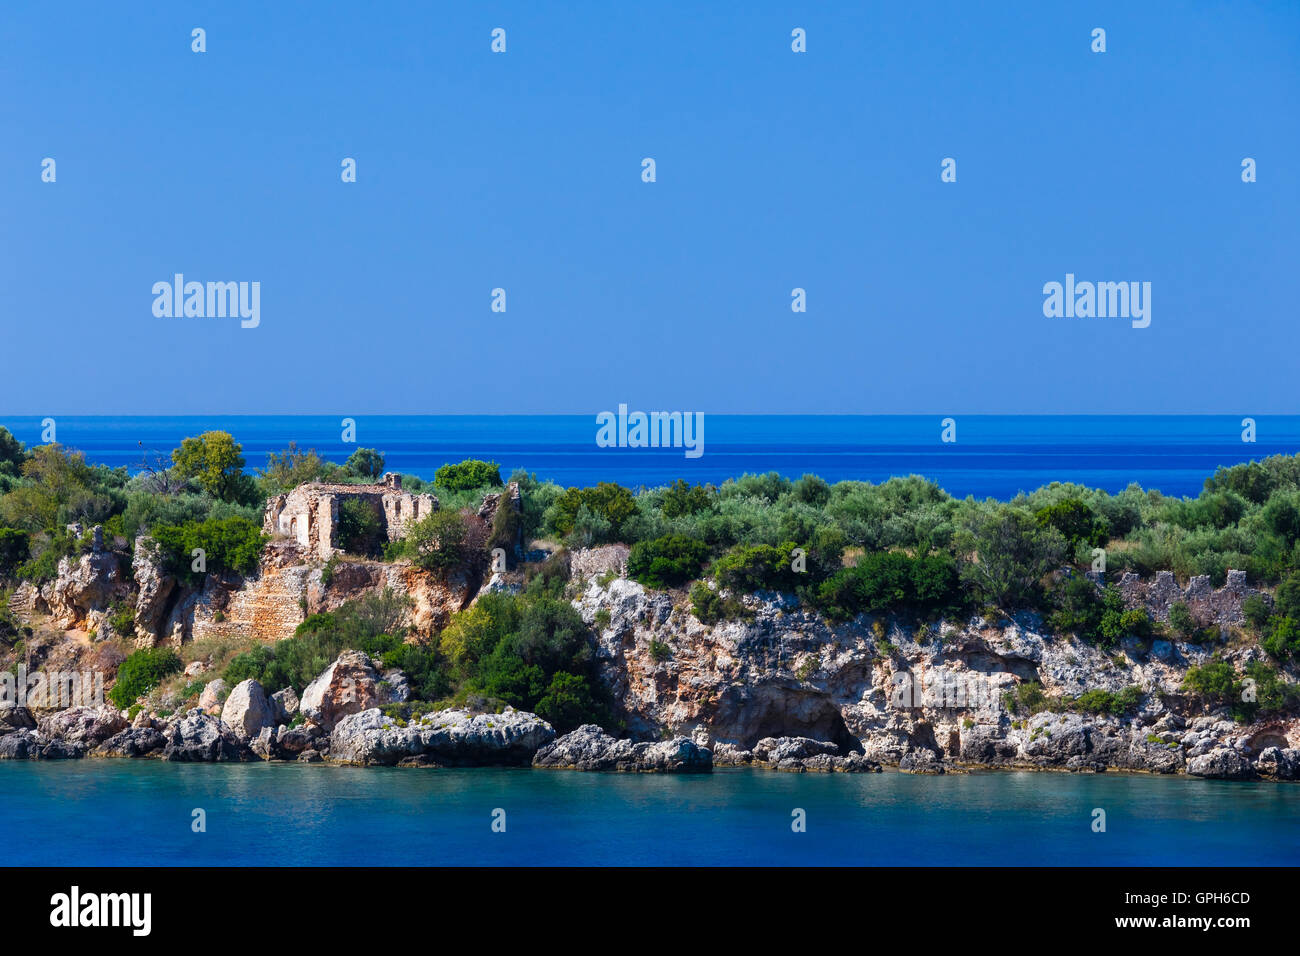 The old castle ruins in Meropi islet across Kardamili town, a coastal town built by the Venetians Stock Photo